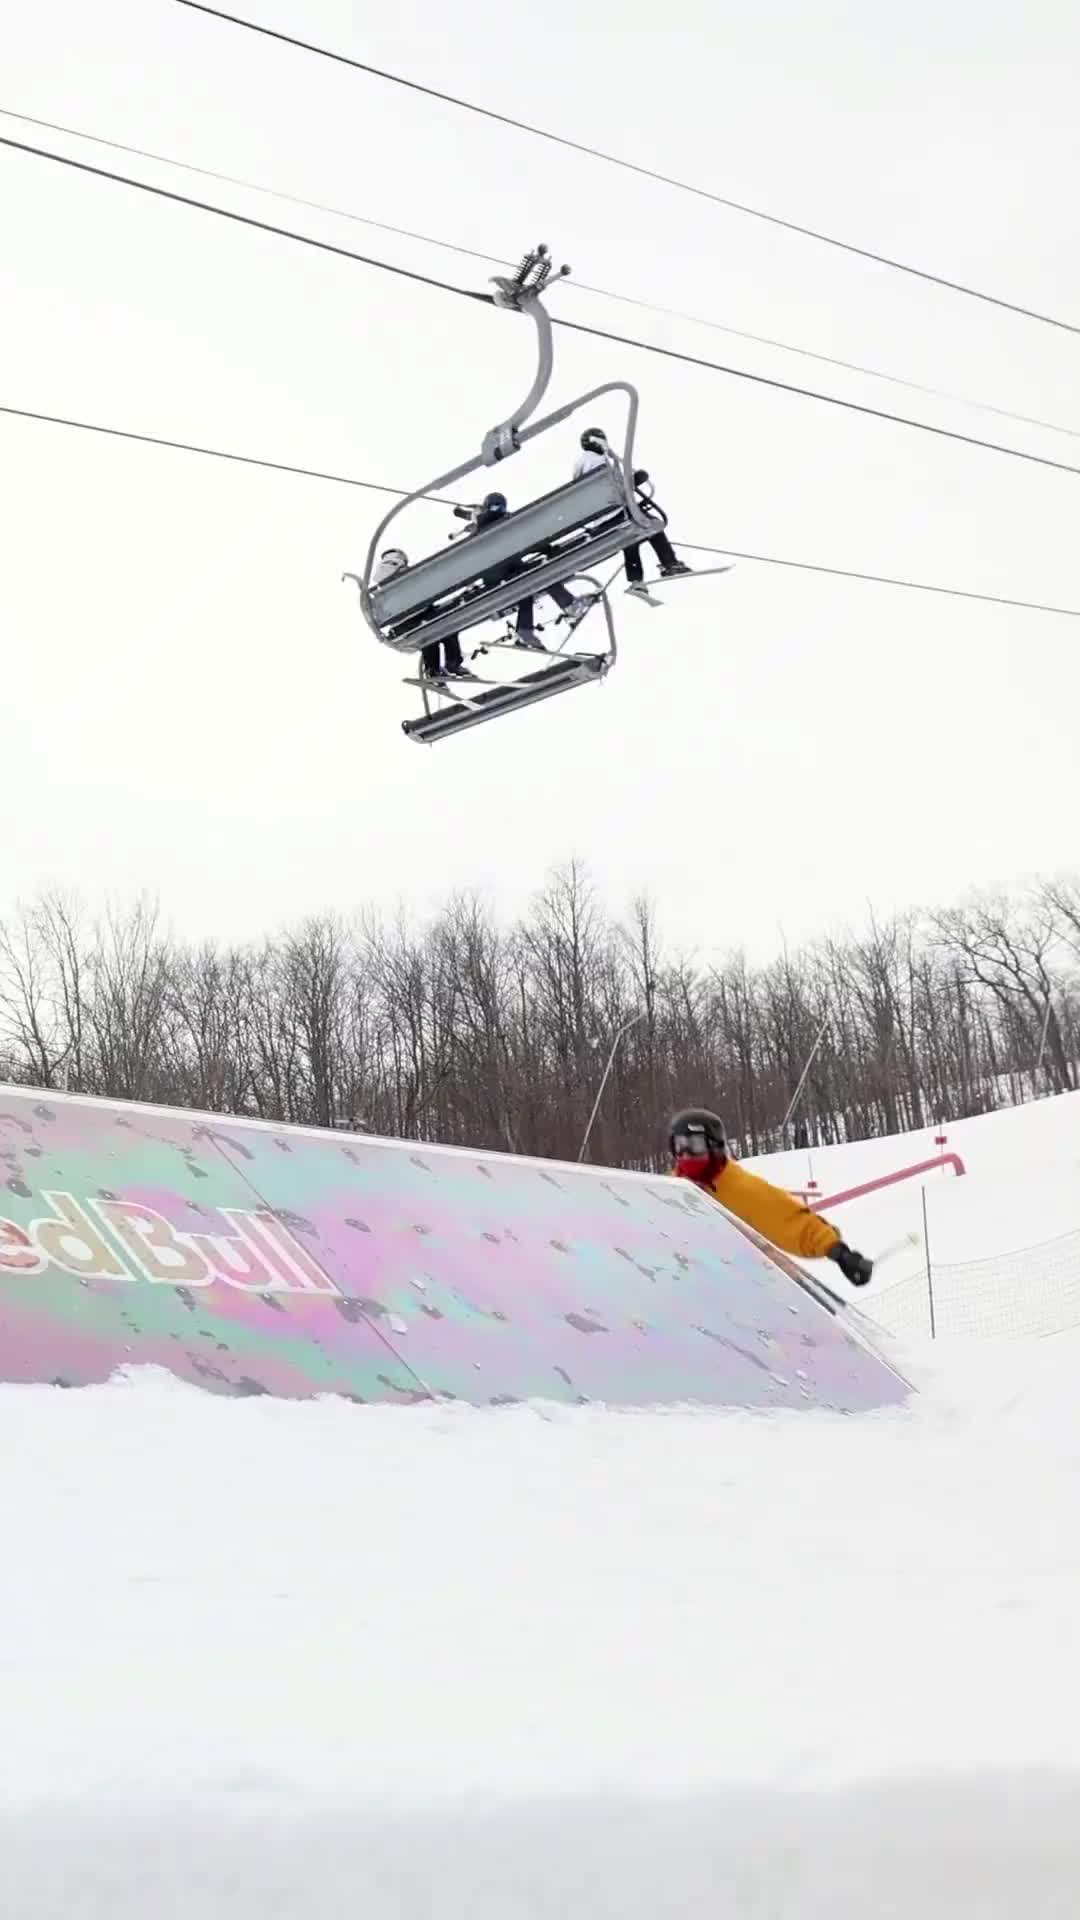 Exciting Ski Clips from Kyiv's Double Triple Fest